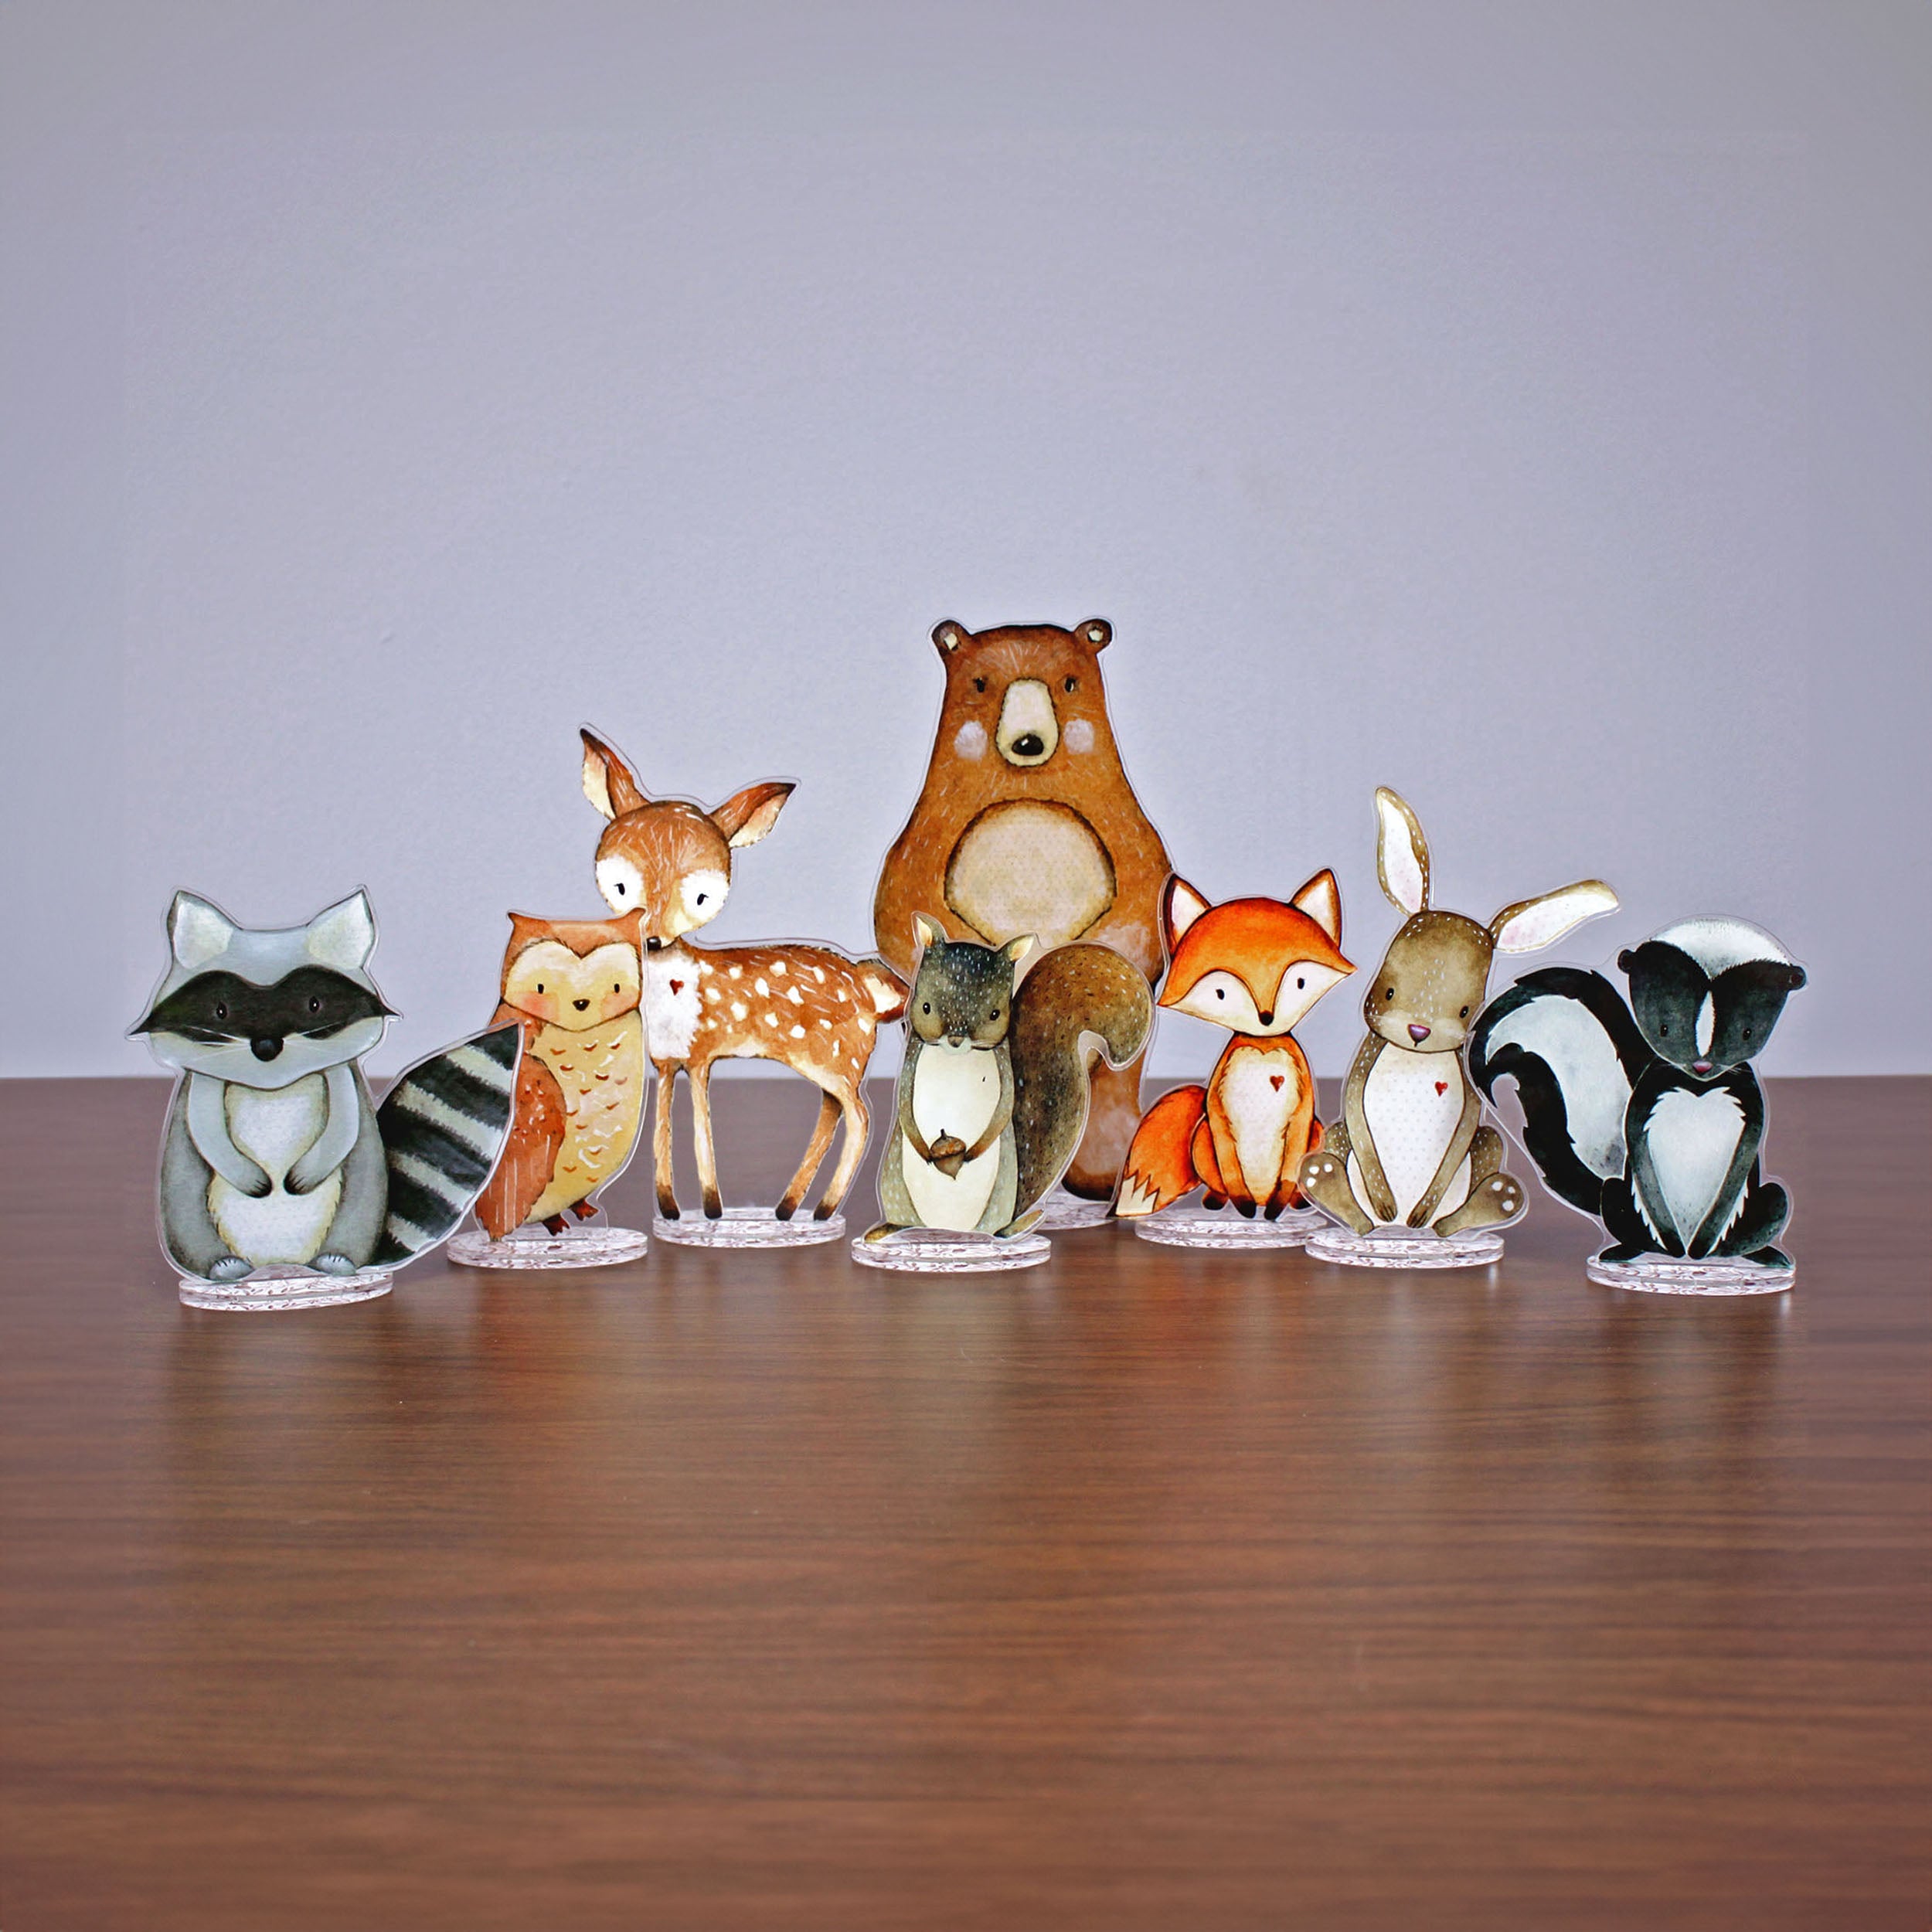 Set of acrylic cutout woodland critters with stands on a table.